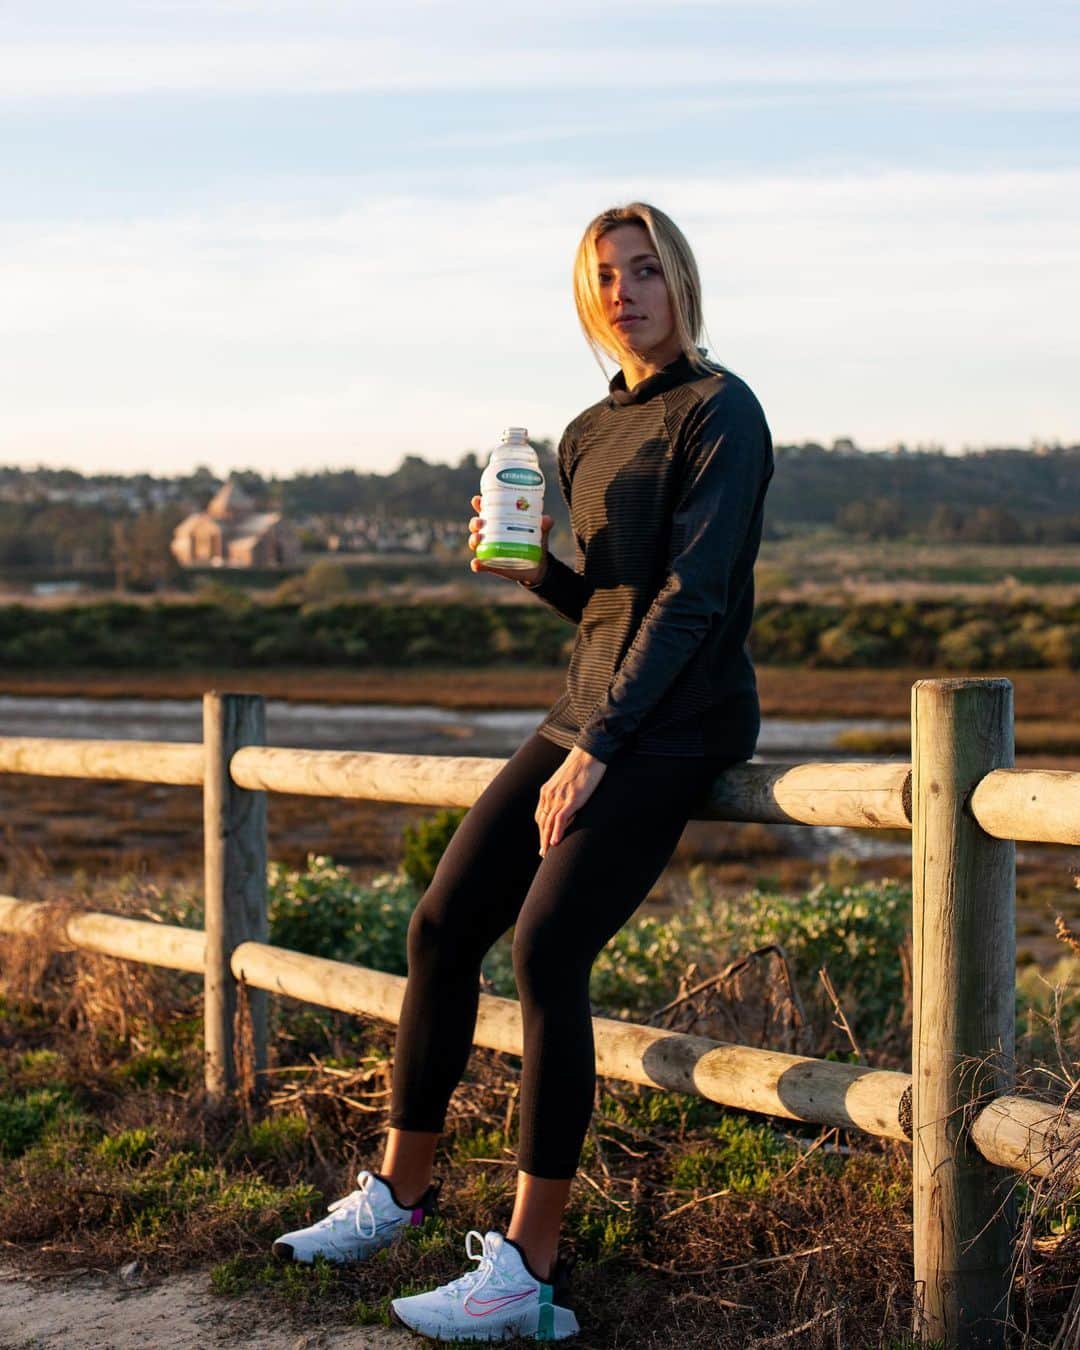 Sierra Brooksのインスタグラム：「Excited for the next few weeks on the road! So happy to have @drinkcfnutrition as a partner both on and off the golf course – the natural ingredients help me hydrate and recover through long days training and playing. Ready to get after it!」